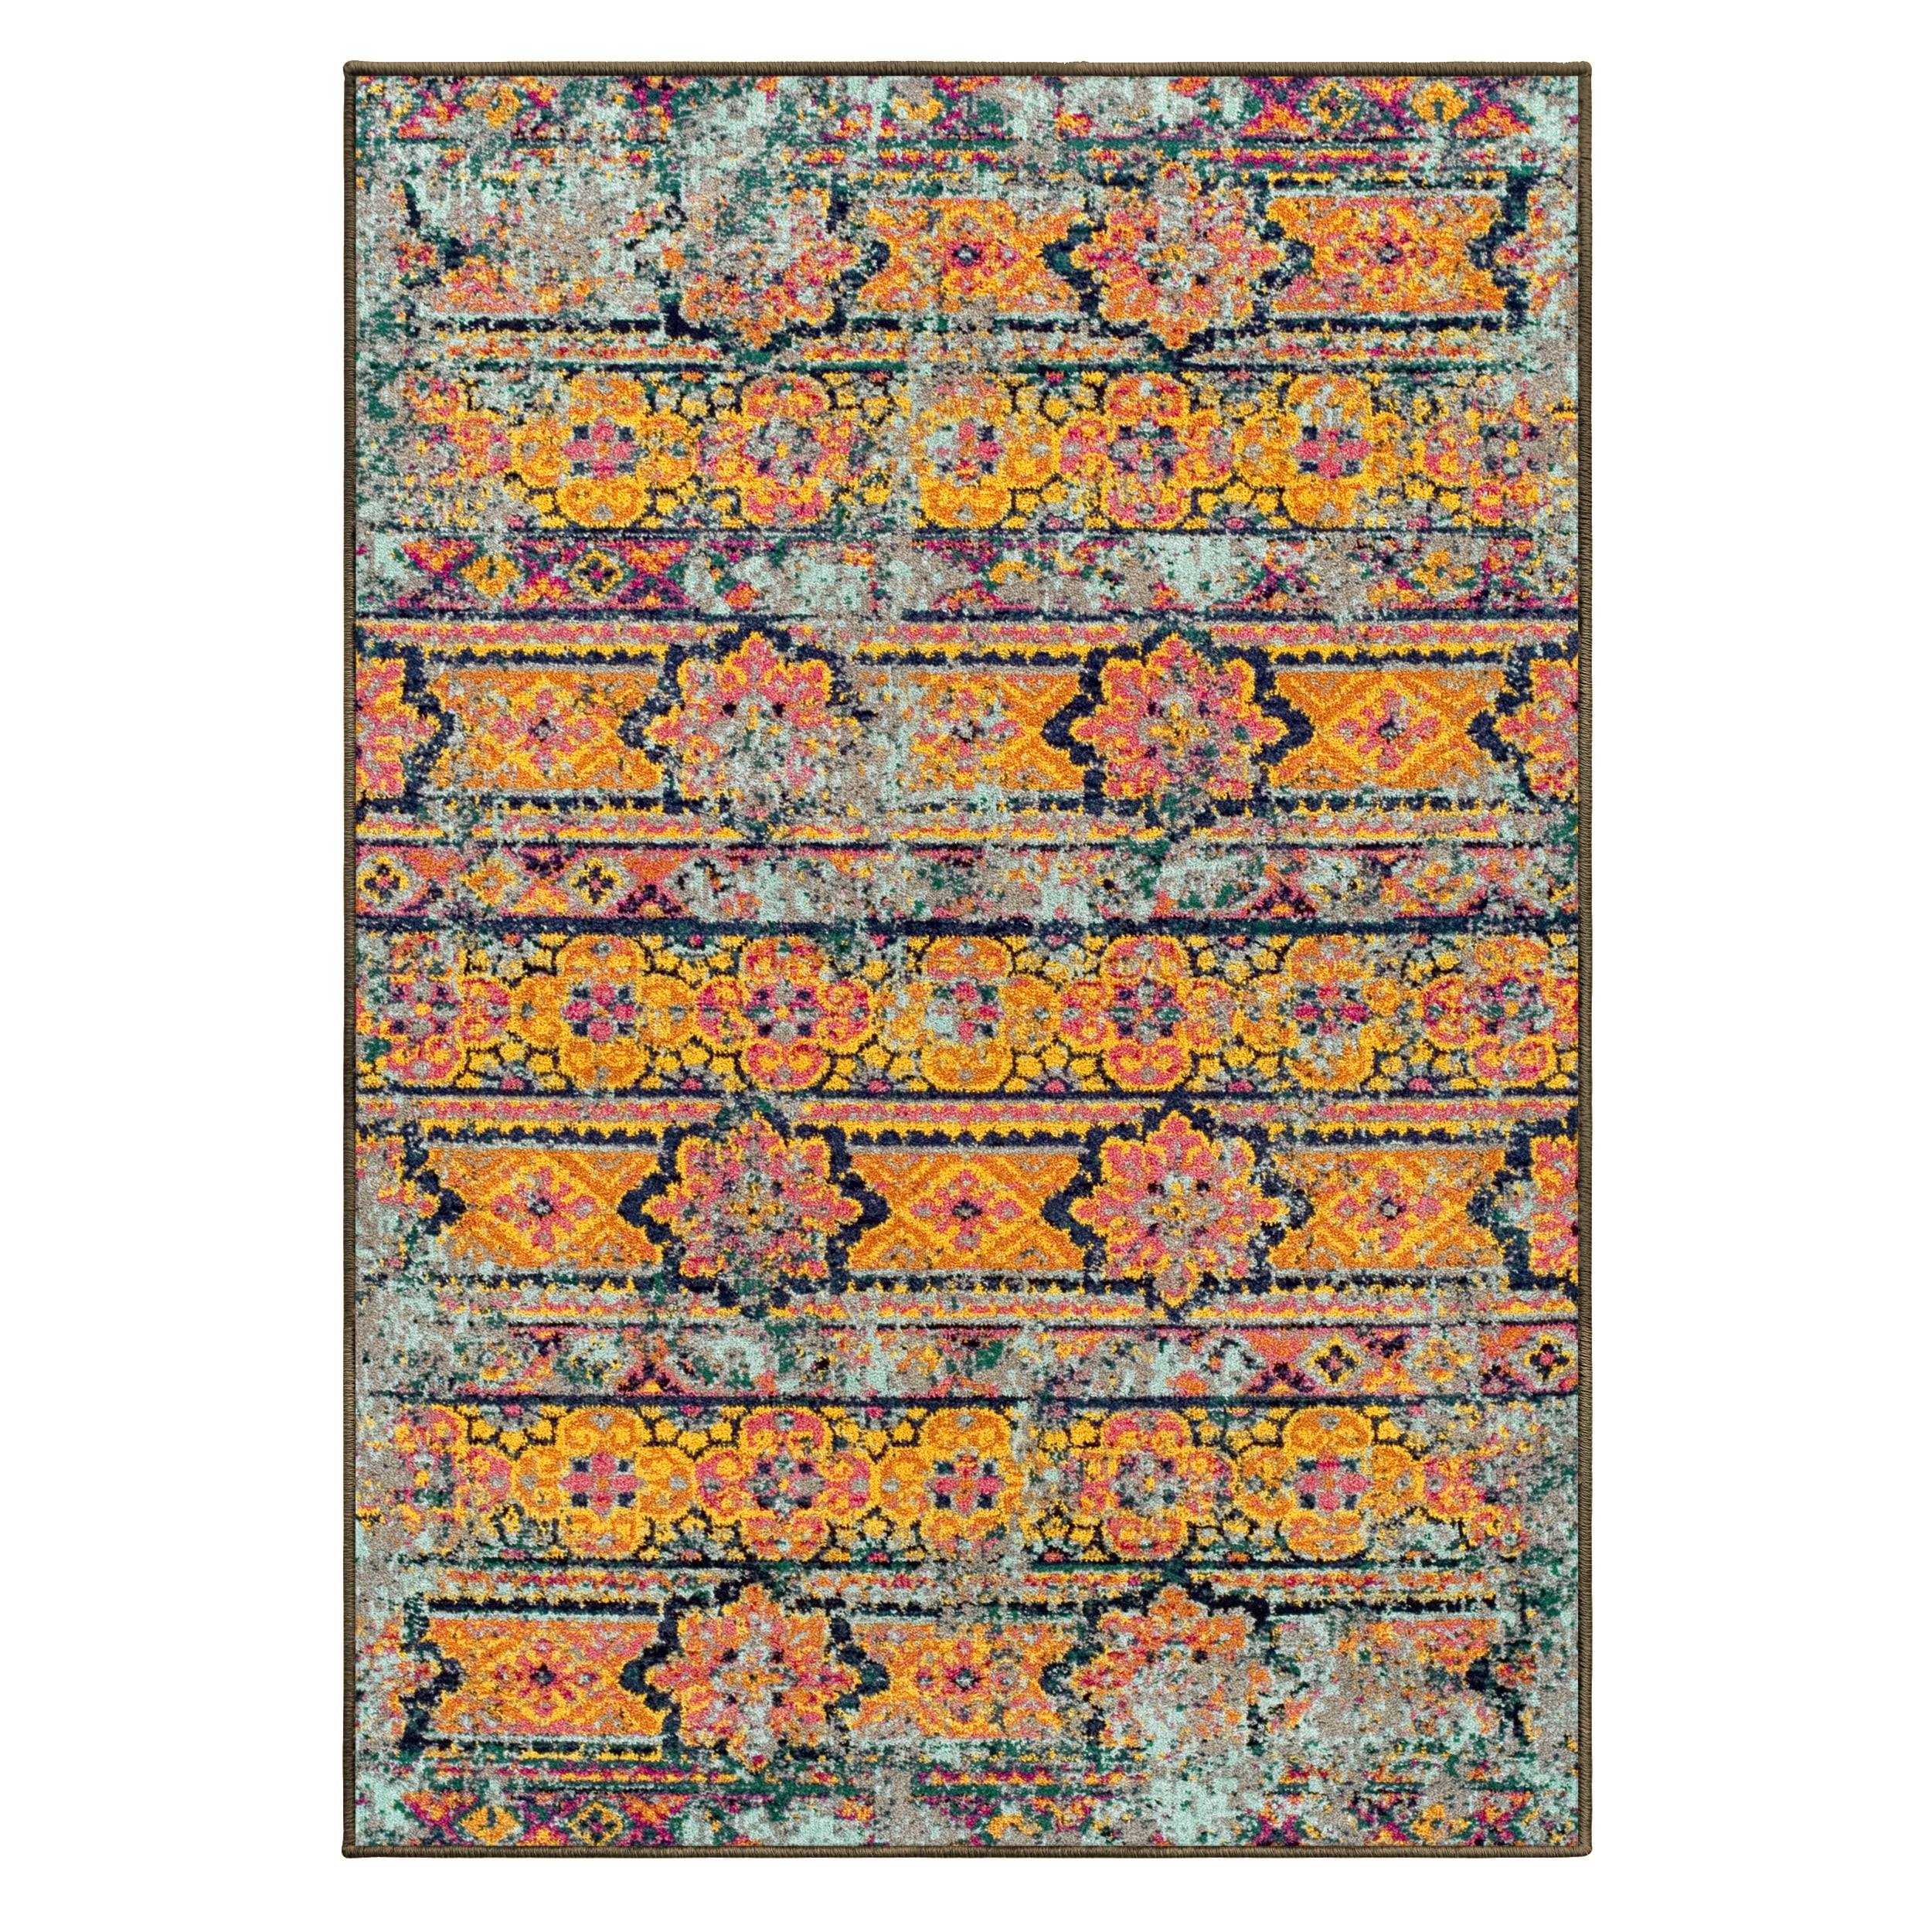 Durable Zebrina Collection Area Rug 27 x 8 Runner Superior 10mm Pile Height with Jute Backing Aqua Fashionable and Easy Maintenance